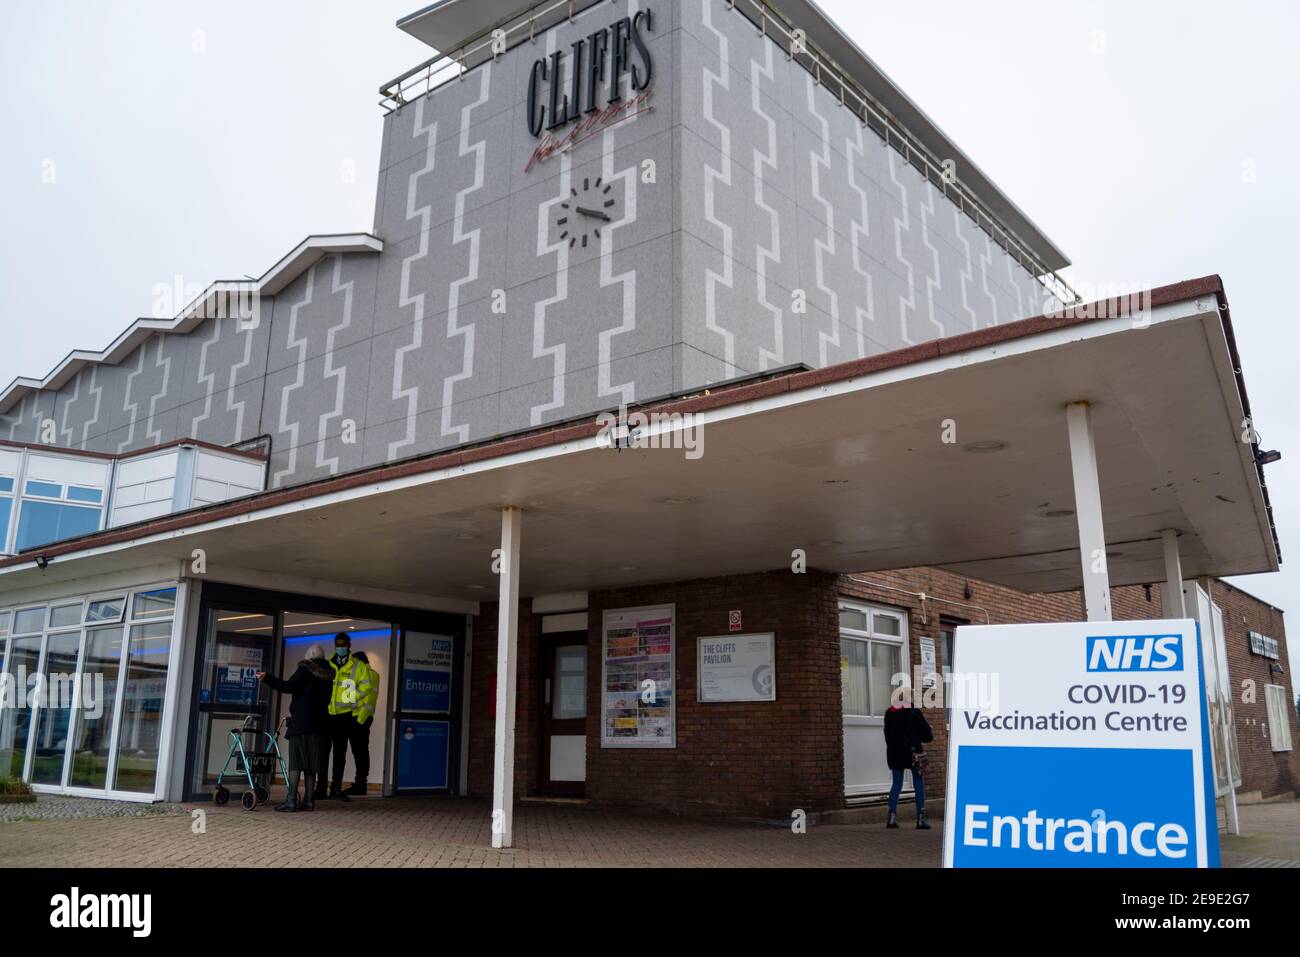 Southend on Sea, Essex, UK. 4th Feb, 2021. The Cliffs Pavilion theatre has today opened as a Coronavirus mass vaccination centre. The theatre has been closed for the duration of the pandemic in the UK with all shows cancelled. The centre has a much larger capacity for vaccinations than other locations opened thus far locally and is among a series opening nationally this week as the NHS rapidly accelerates the number of sites that can give the crucial first dose of the vaccine. Senior person arriving Stock Photo